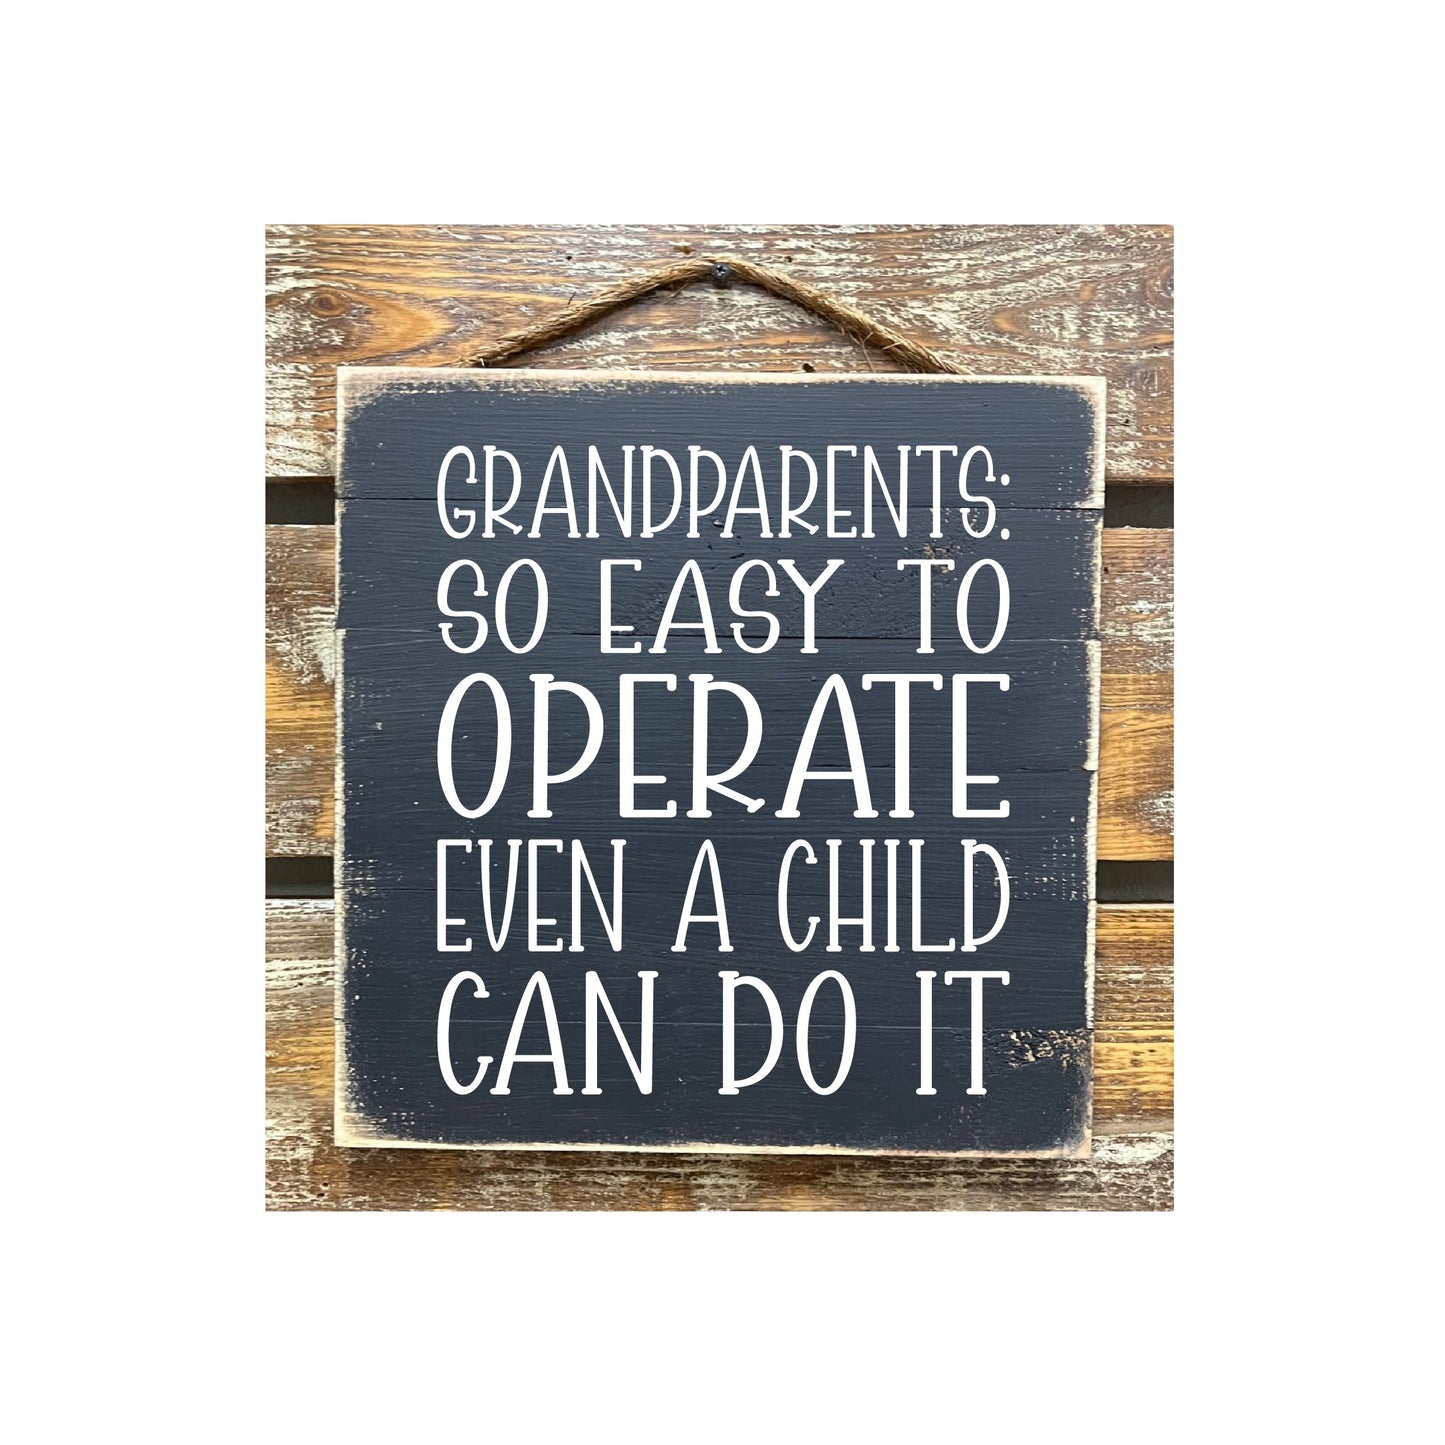 Grandparents Are So Easy To Operate Even A Child Can Do It